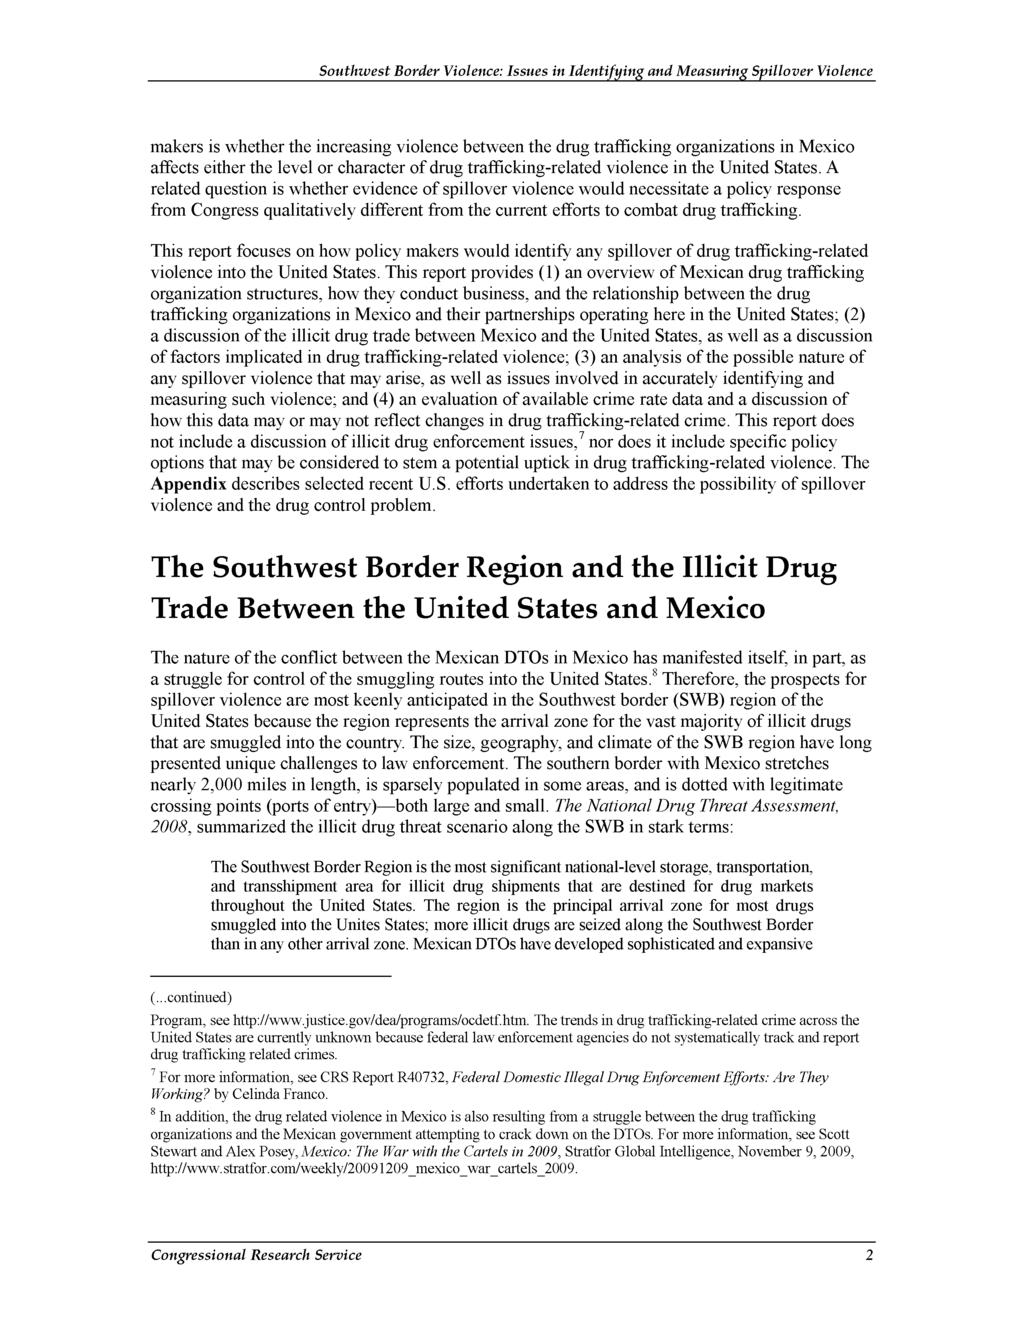 makers is whether the increasing violence between the drug trafficking organizations in Mexico affects either the level or character of drug trafficking-related violence in the United States.